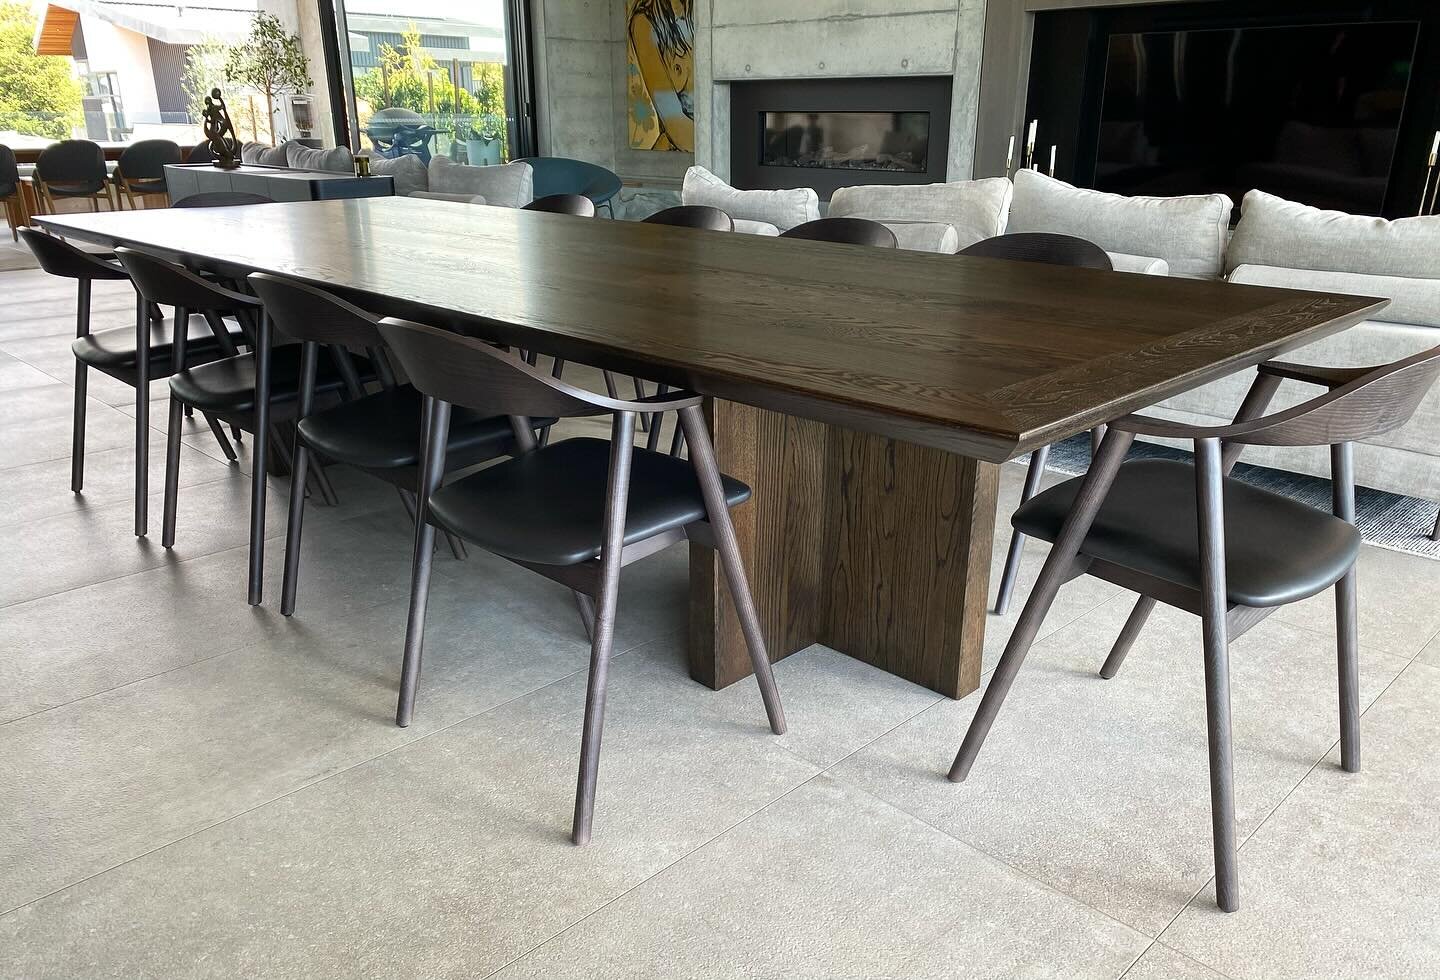 Beautiful &ldquo;Inola&rdquo; sitting right at place in her new forever home. 3600mm x 1300mm, designed for large families and entertaining. Hand veneered American Oak over a torsion box design,ensuring stability for years, with a moody dark oak stai